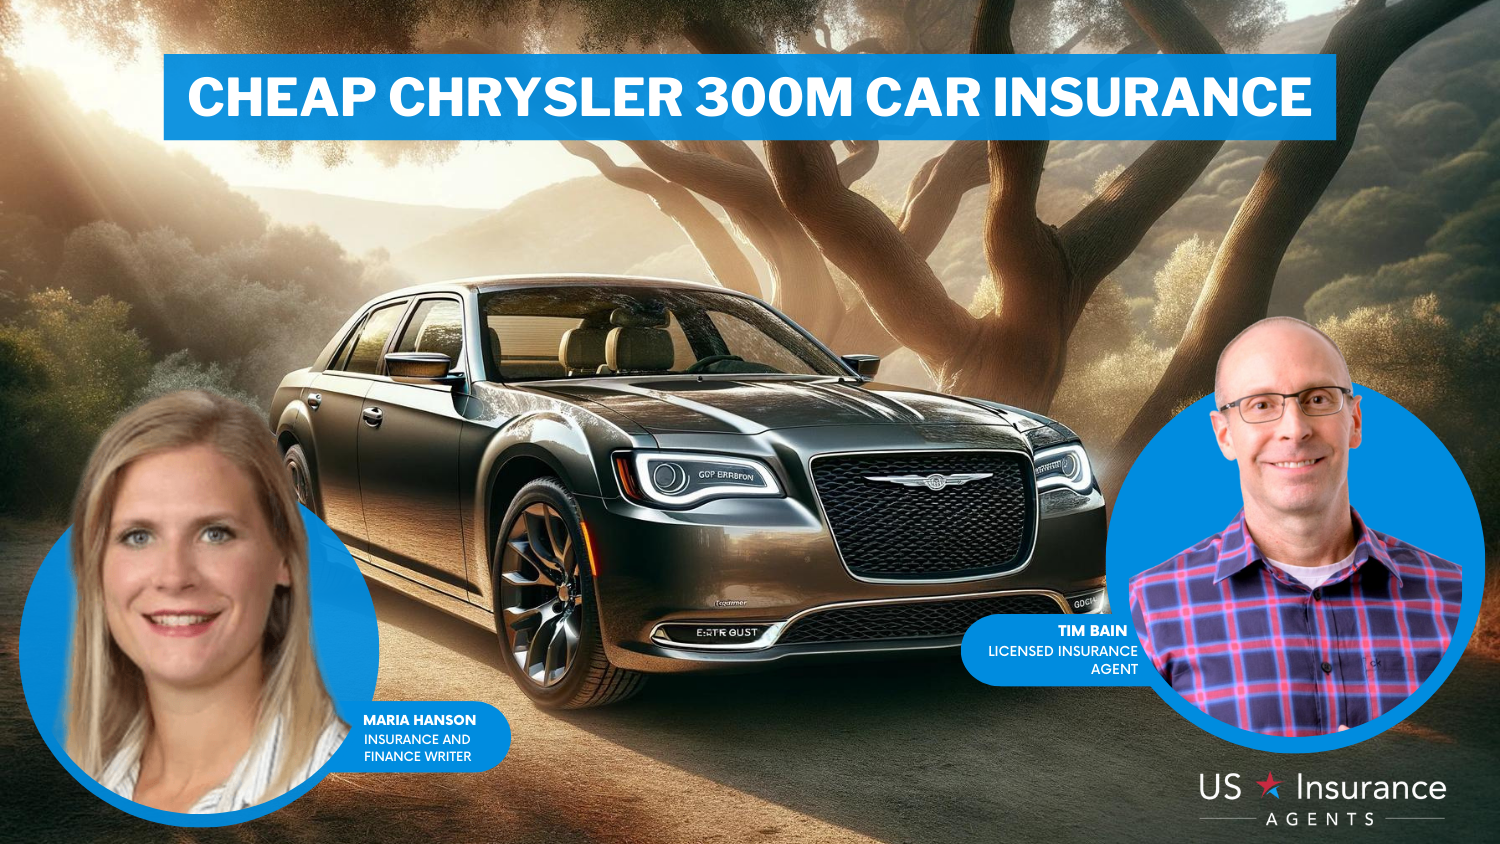 Cheap Chrysler 300M Car Insurance: Travelers, Nationwide and Farmers